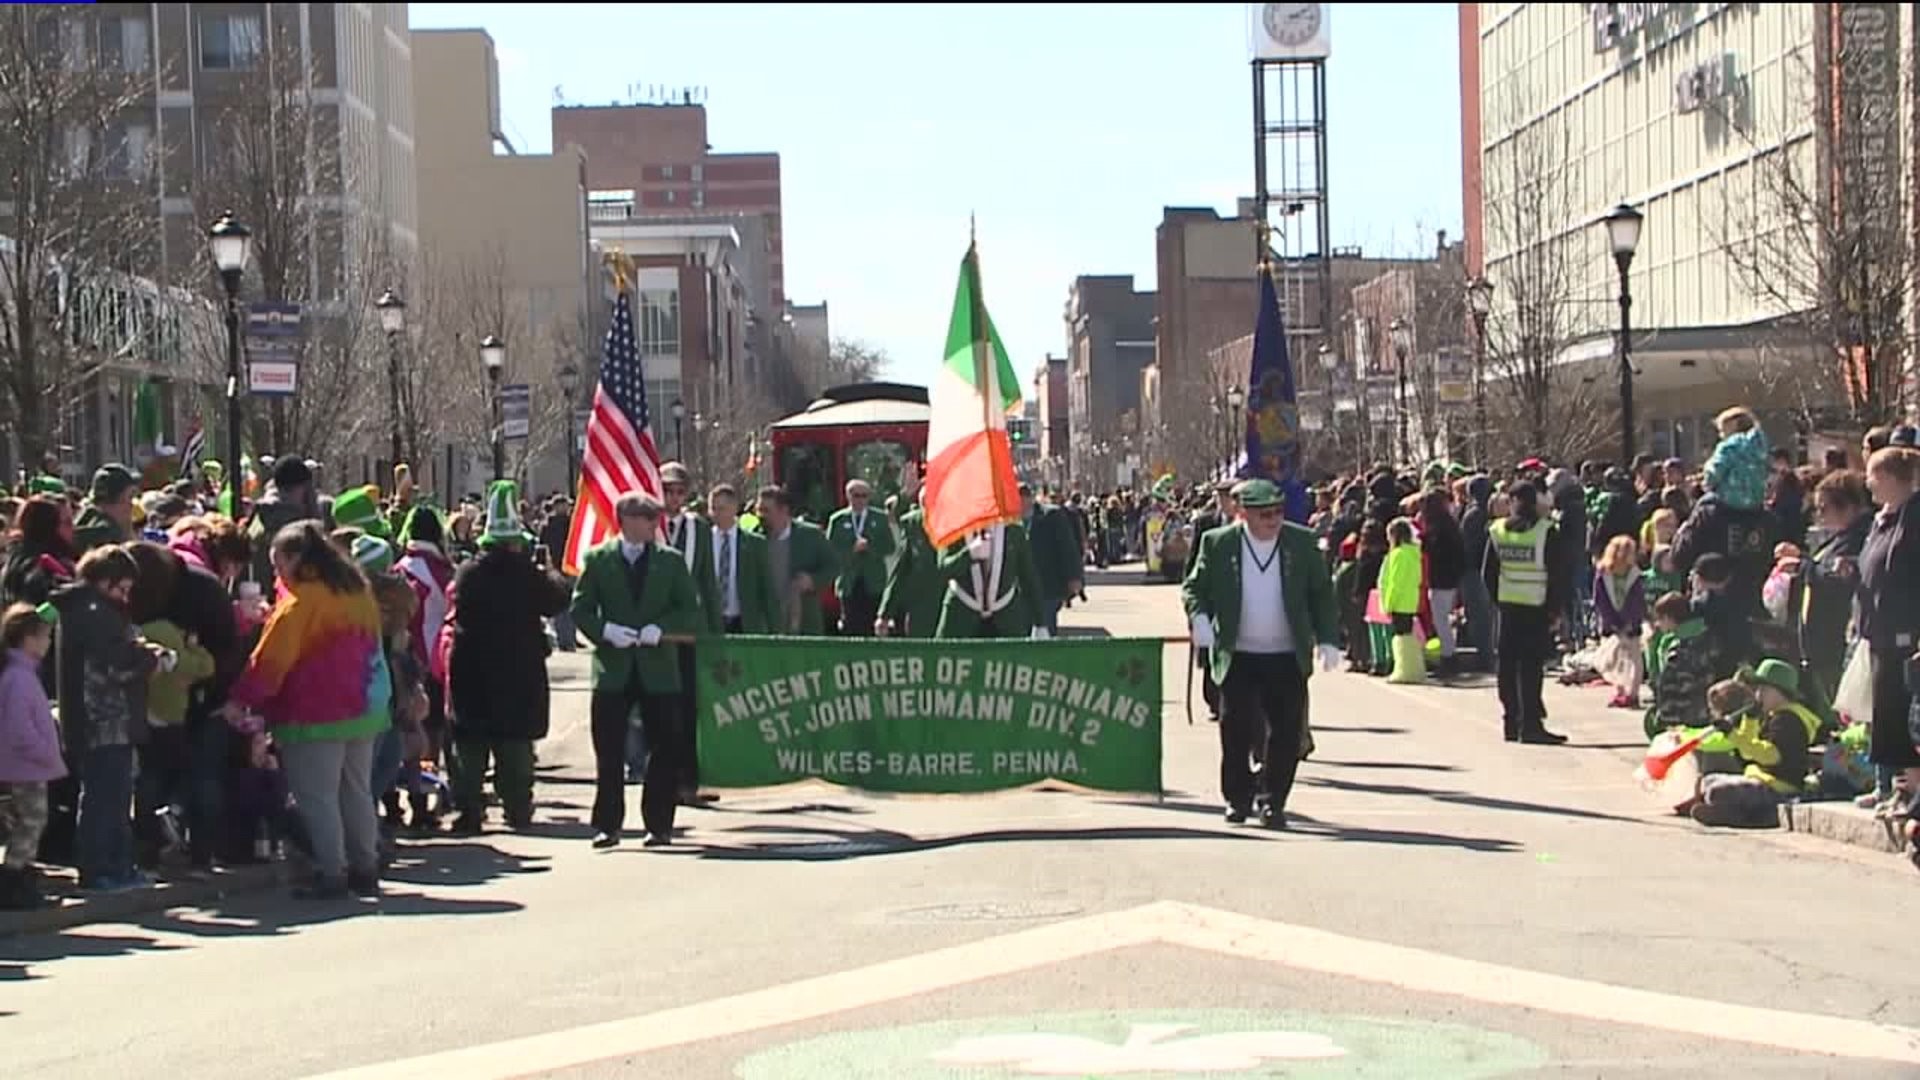 Wilkes-Barre usually holds its parade on a Sunday in March.